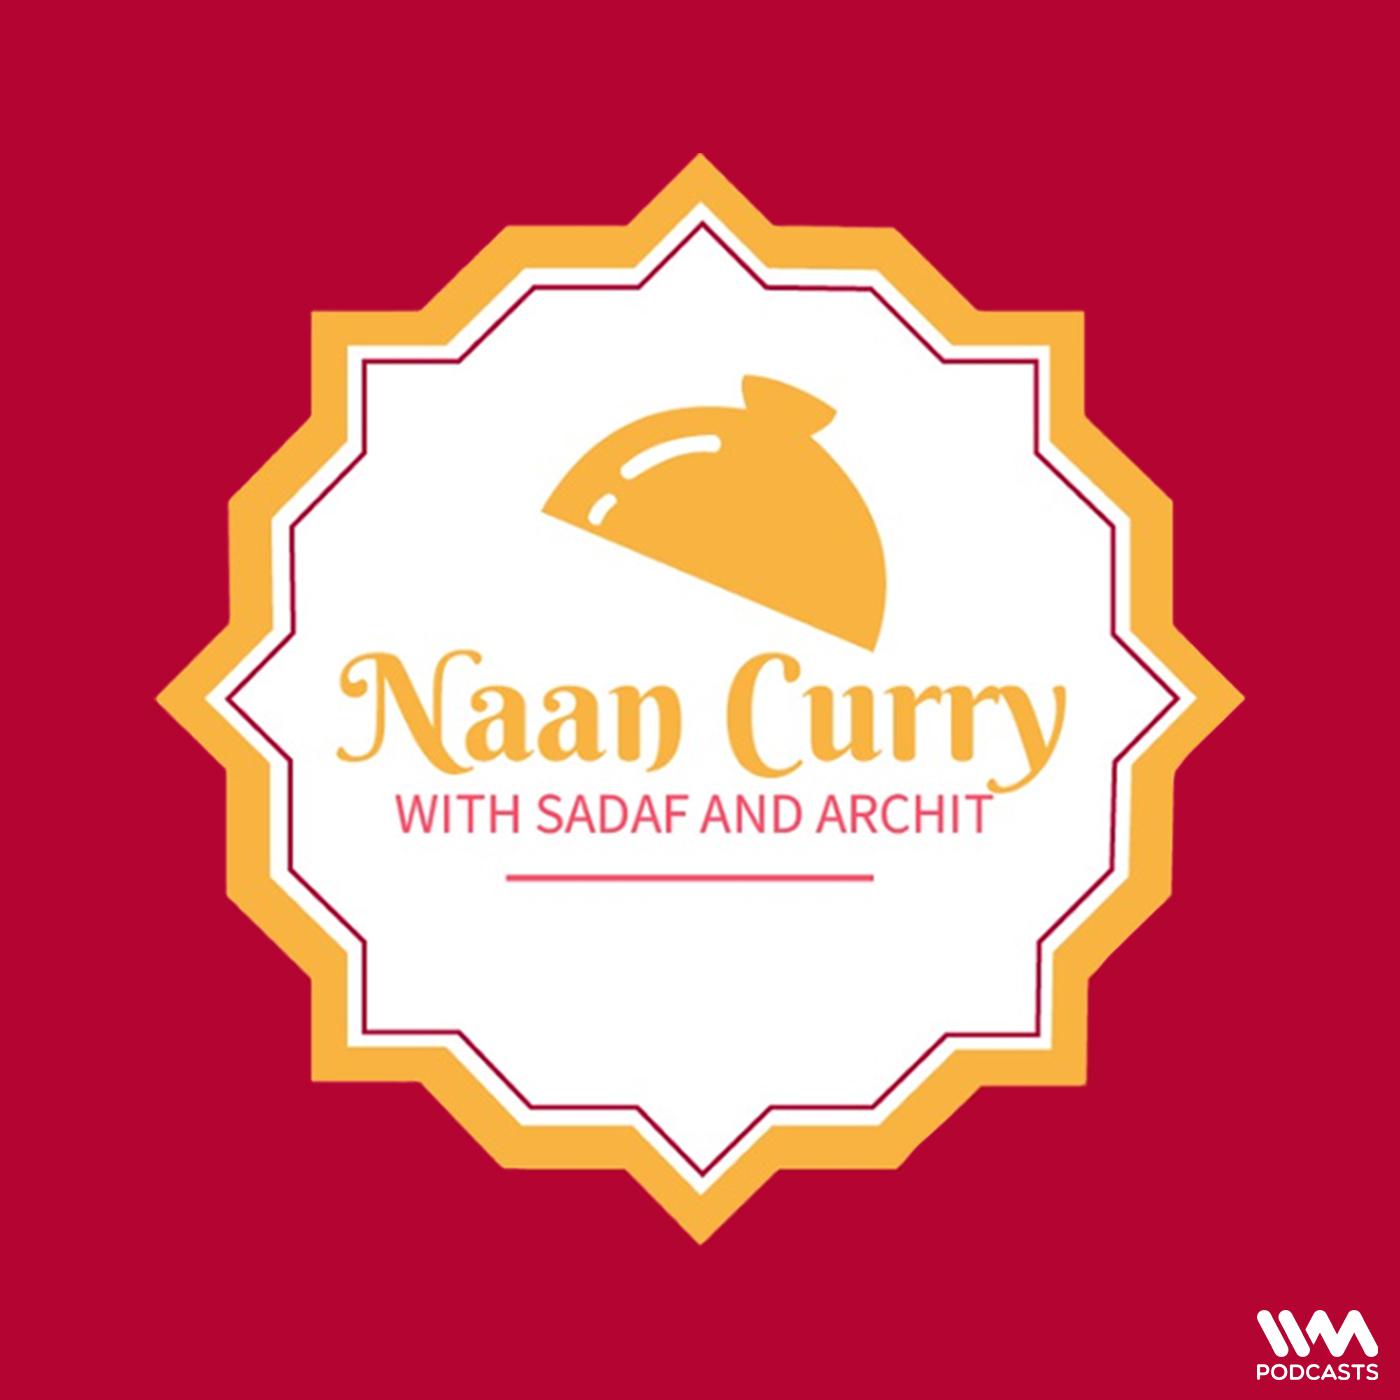 Naan Curry with Sadaf and Archit